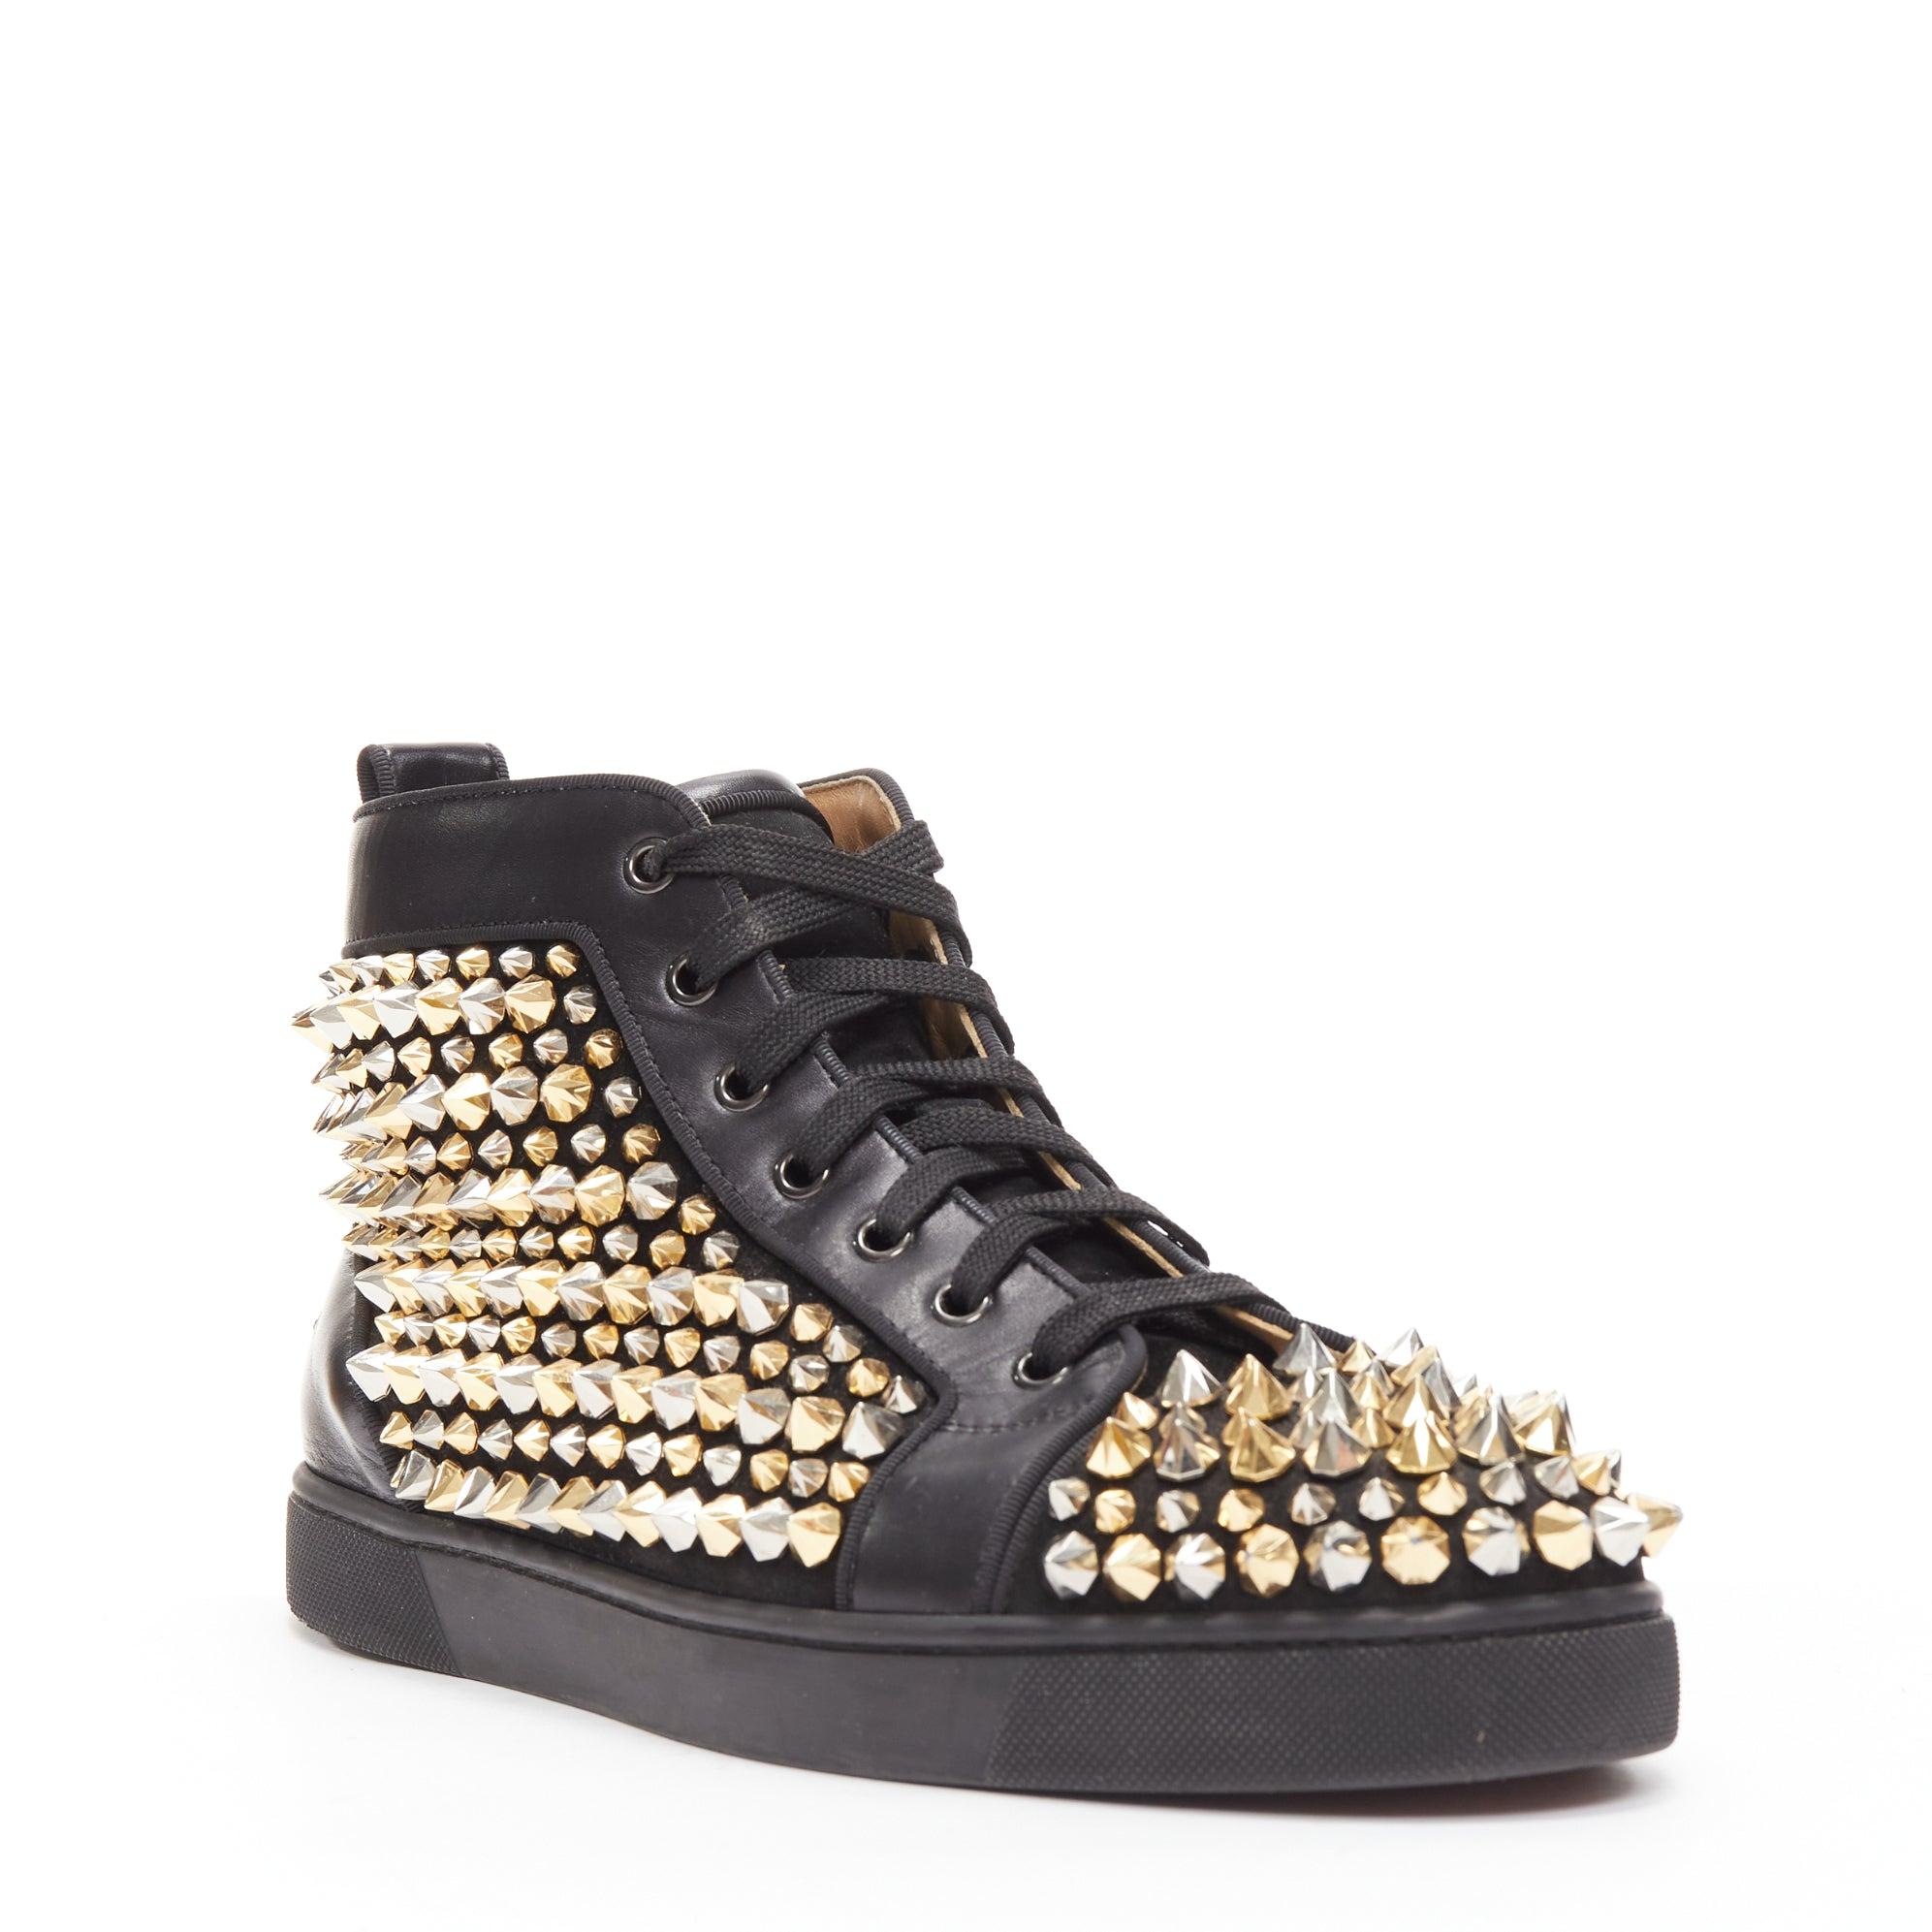 CHRISTIAN LOUBOUTIN Louis black gold silver spike stud high top sneaker EU43
Reference: TGAS/D00991
Brand: Christian Louboutin
Model: Louis
Material: Leather, Metal
Color: Black, Gold
Pattern: Solid
Closure: Lace Up
Lining: Brown Leather
Extra